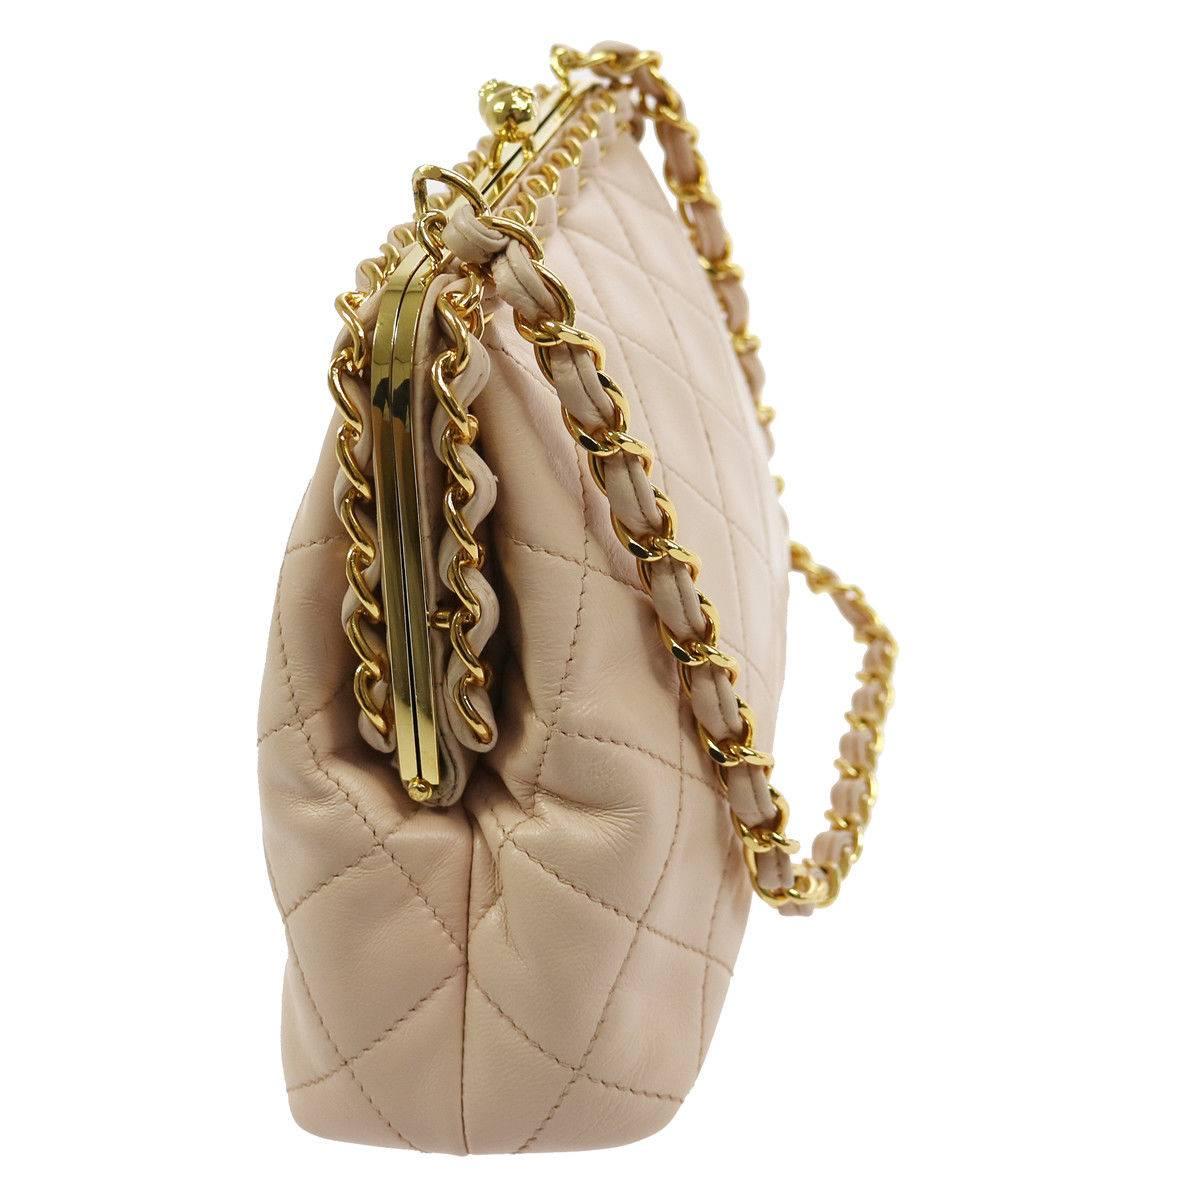 Chanel Nude Lambskin Wraparound KissLock Party Evening Top Handle Shoulder Bag

Lambskin leather
Gold tone hardware
Kisslock closure
Leather lining
Date code present
Made in Italy
Shoulder strap drop 8